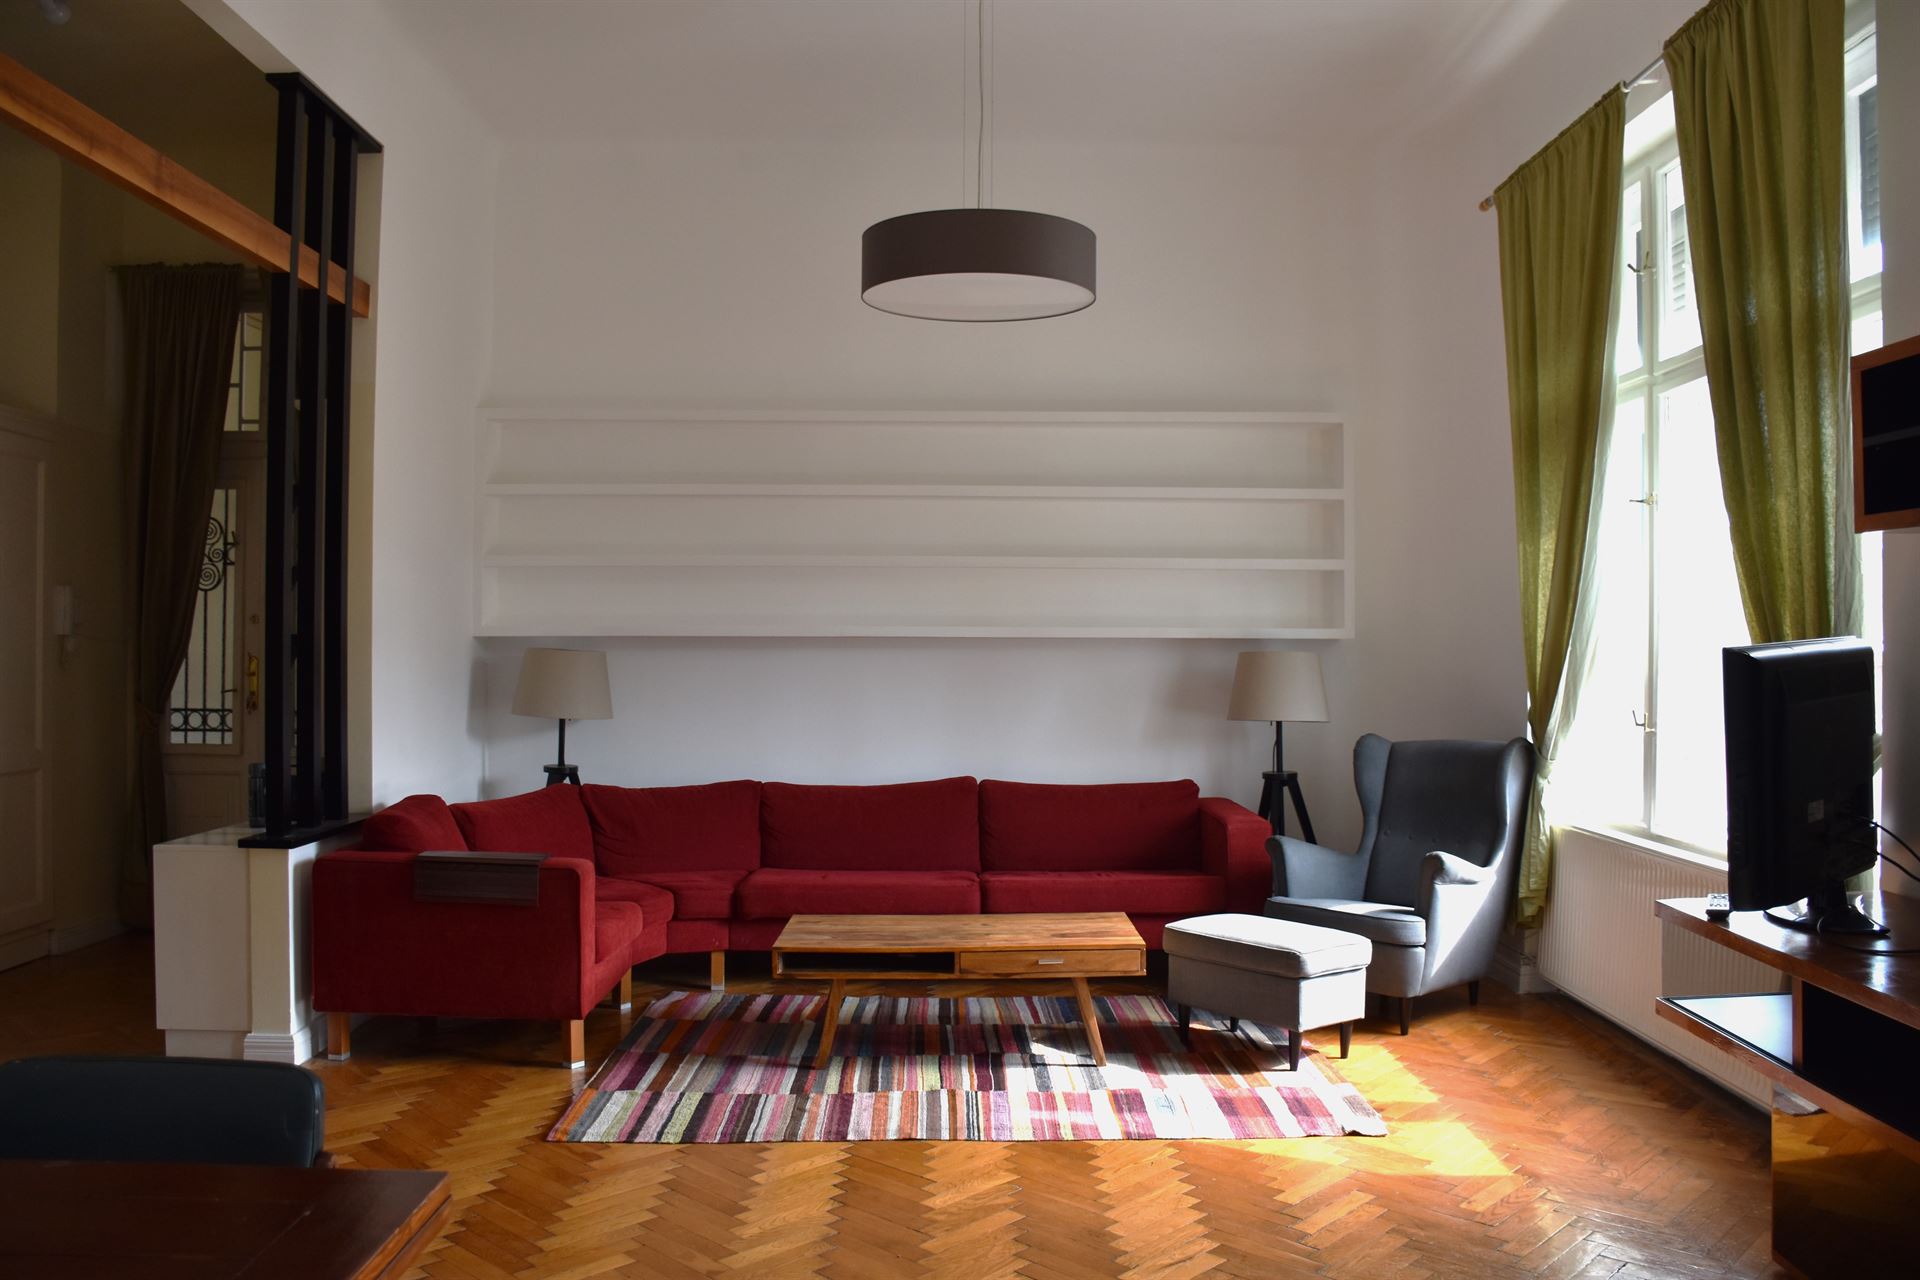 budapest-real-estate-long-term-lease-rental-apartment-downtown-near-opera-big-flat-for-rent-with-balcony2